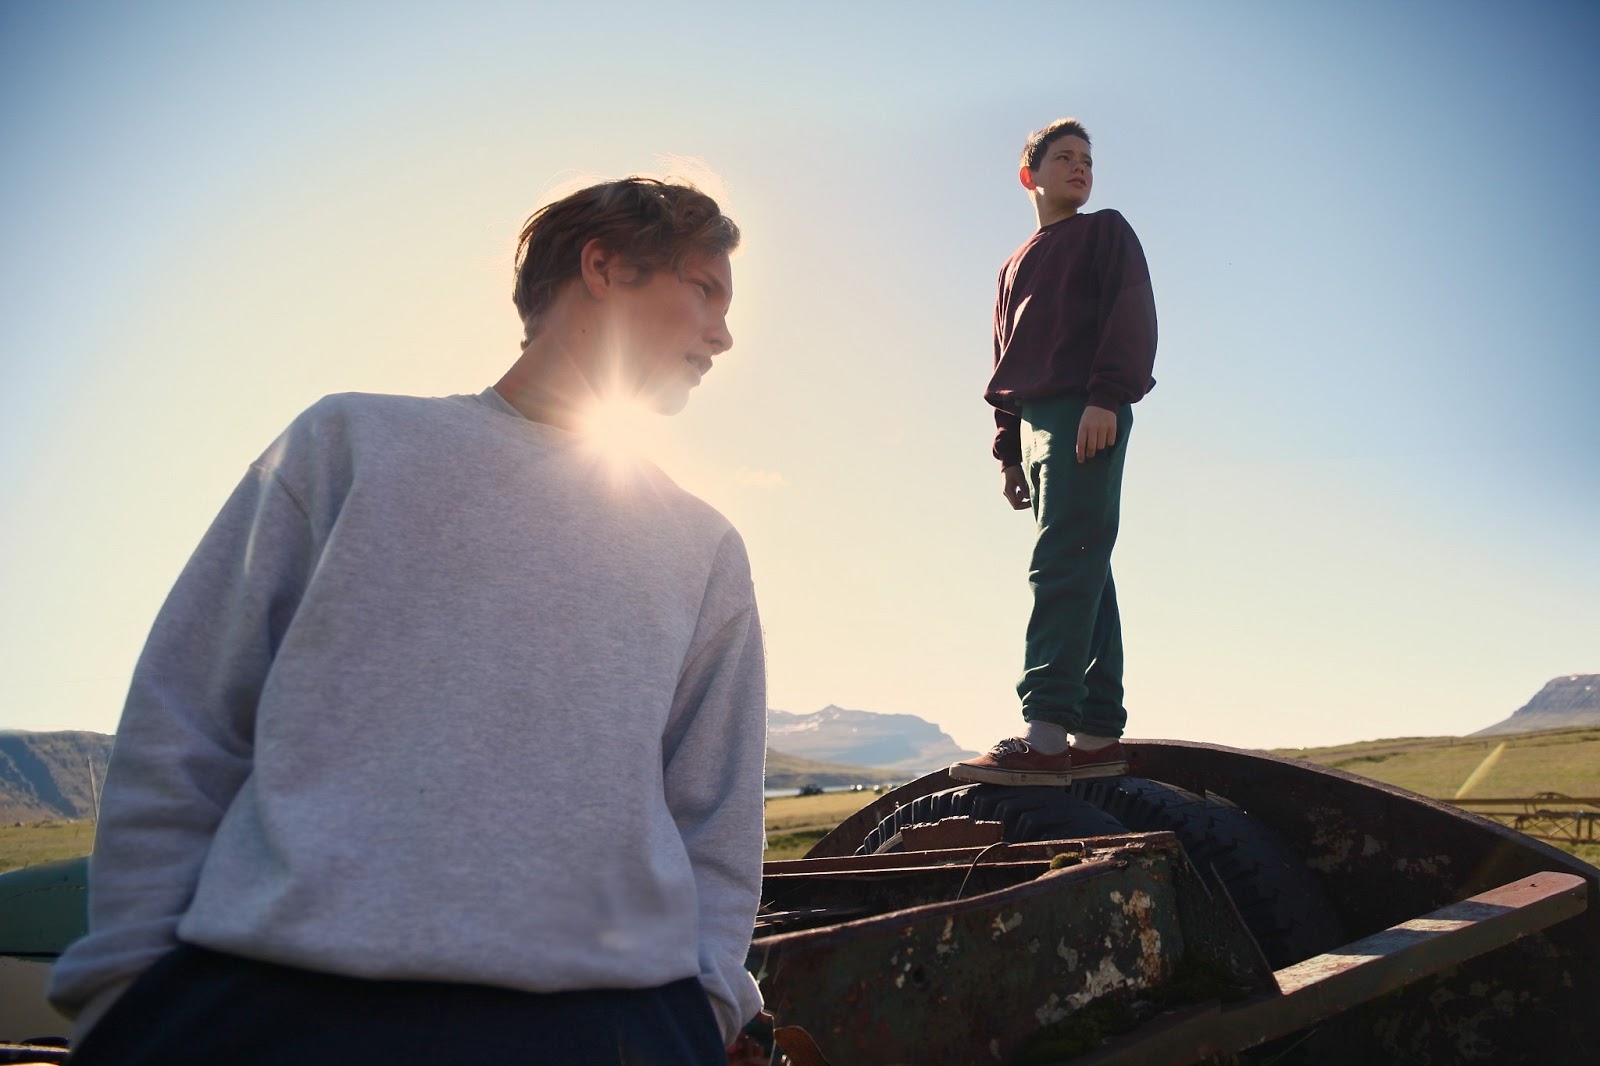 Pogo stick jump exceso Oponerse a Review: Heartstone (Hjartasteinn) – “Poetic, elegant and deeply affecting”  | Live for Films